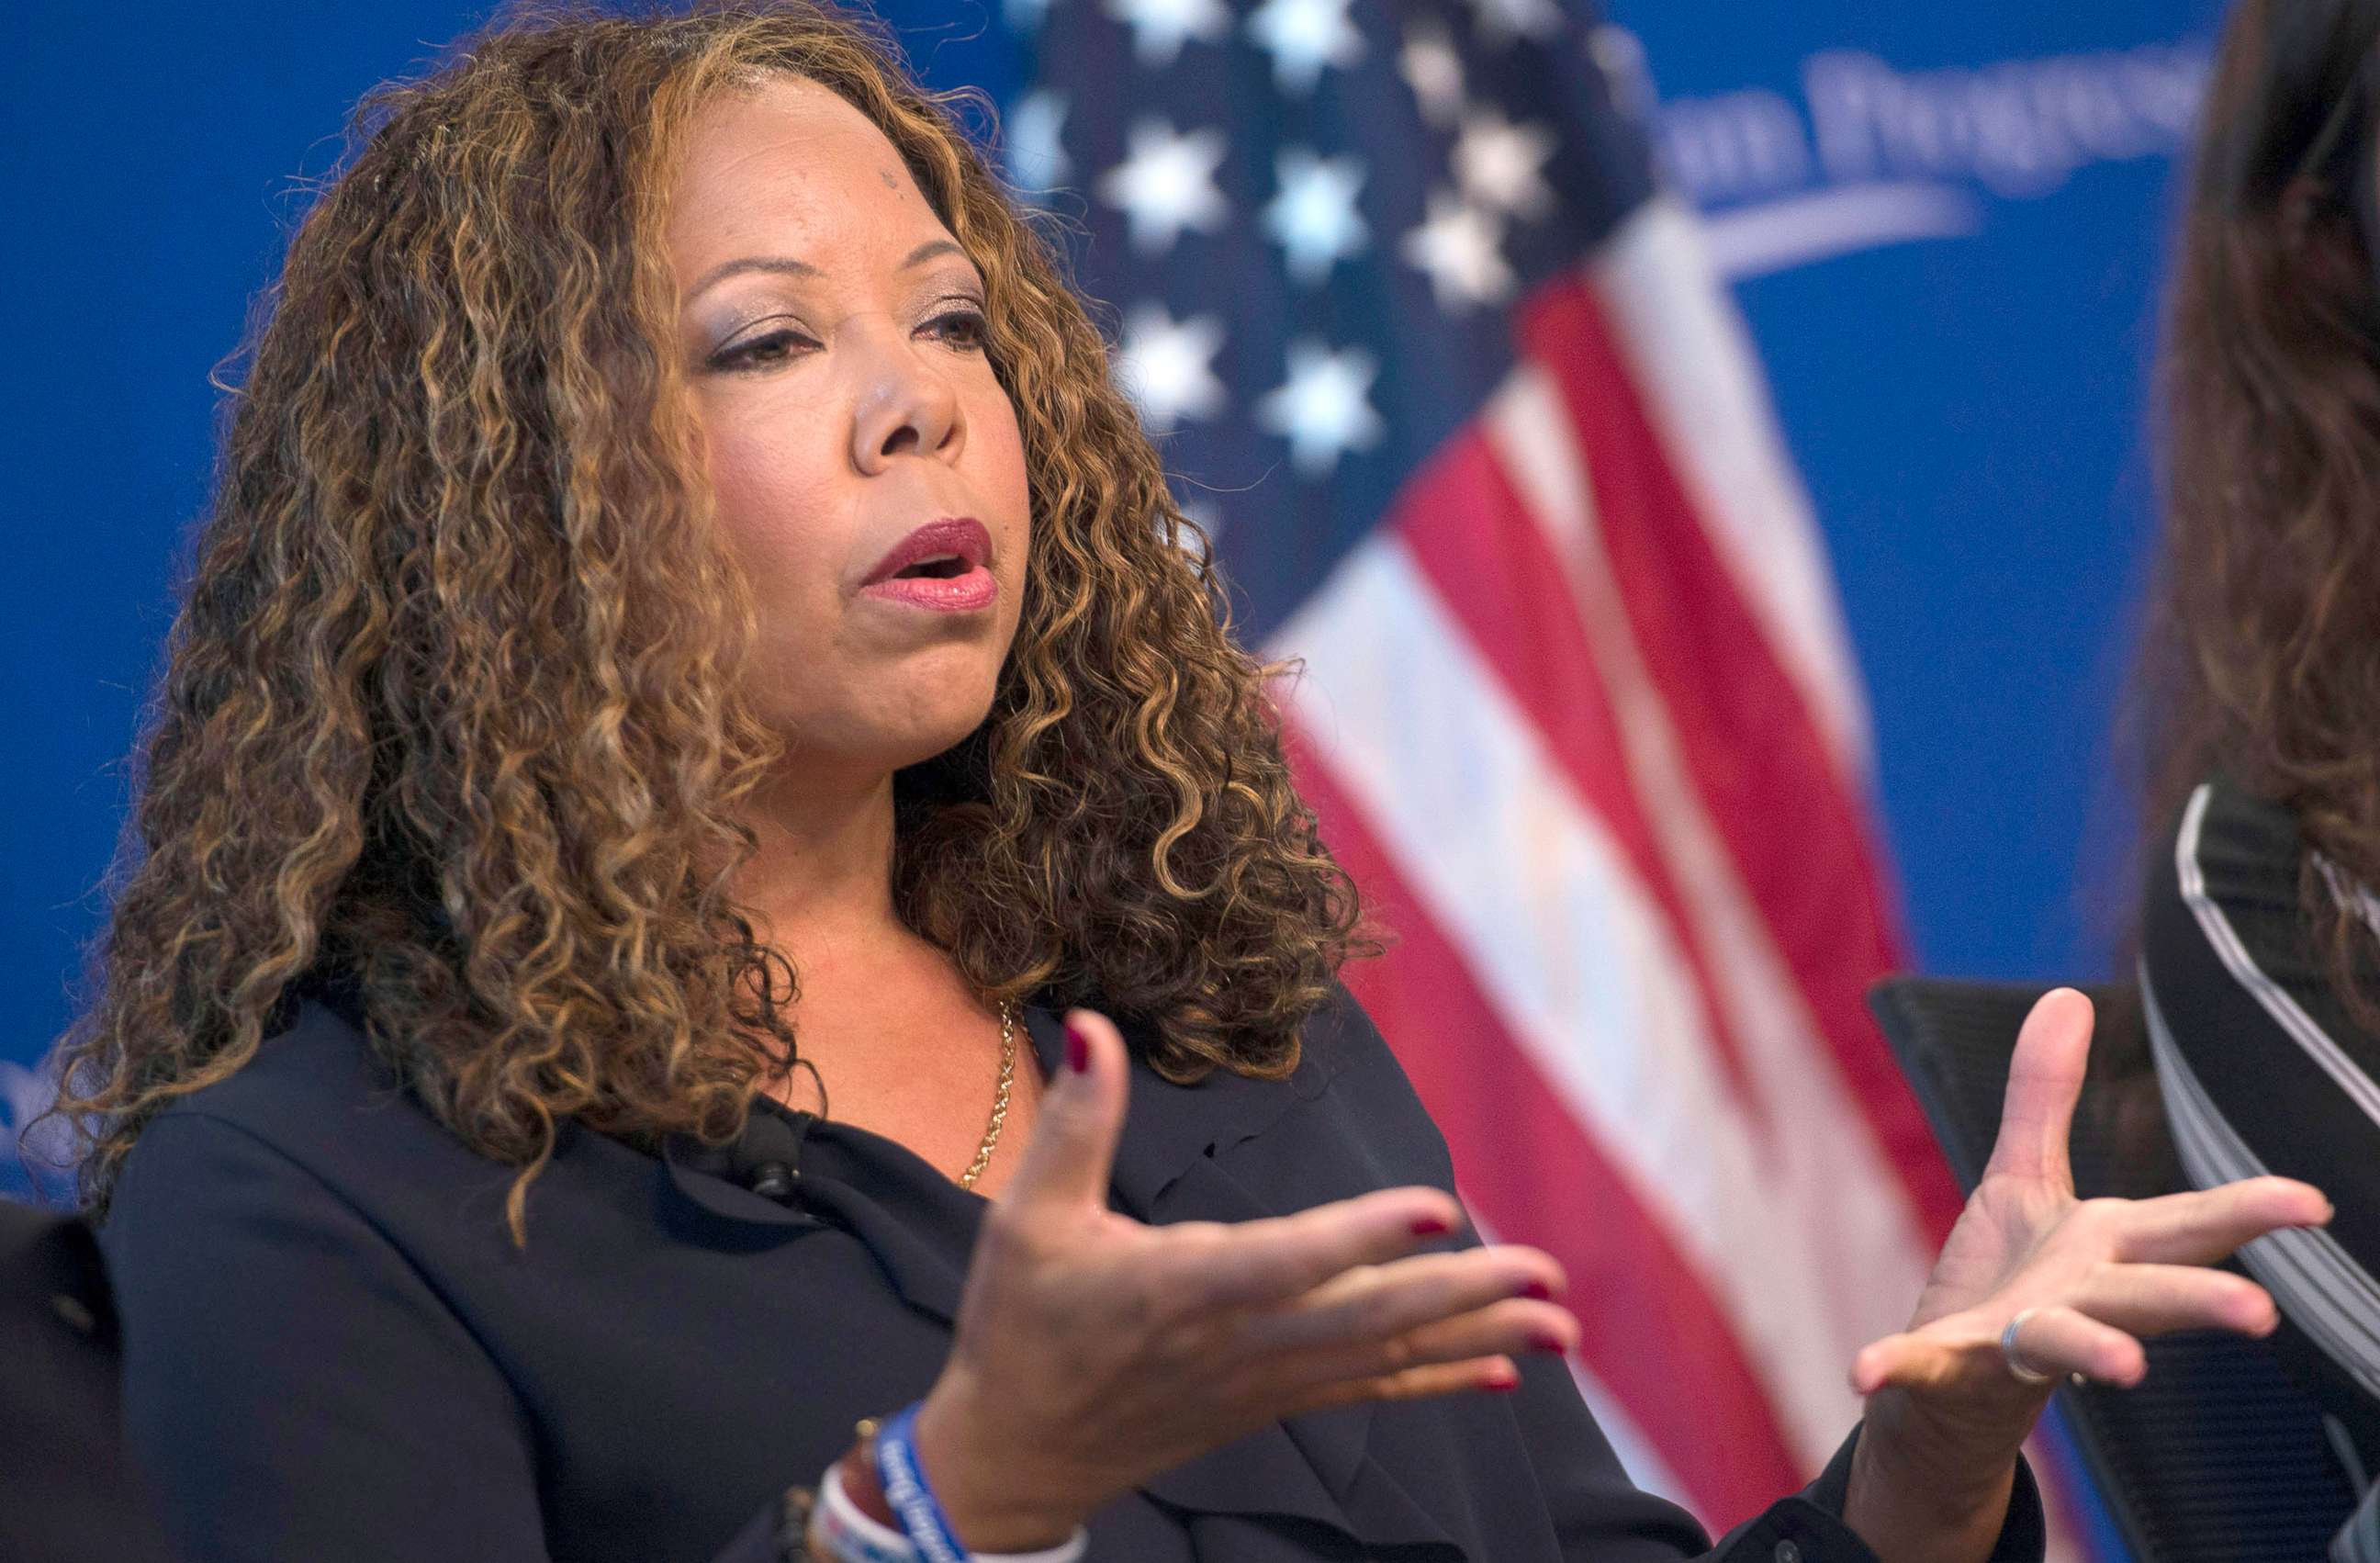 PHOTO: In this file photo, Lucia McBath, faith and community outreach leader for Everytown for Gun Safety, speaks about gun violence and the death of her son Jordan Davis, Oct. 24, 2016, in Washington, DC.